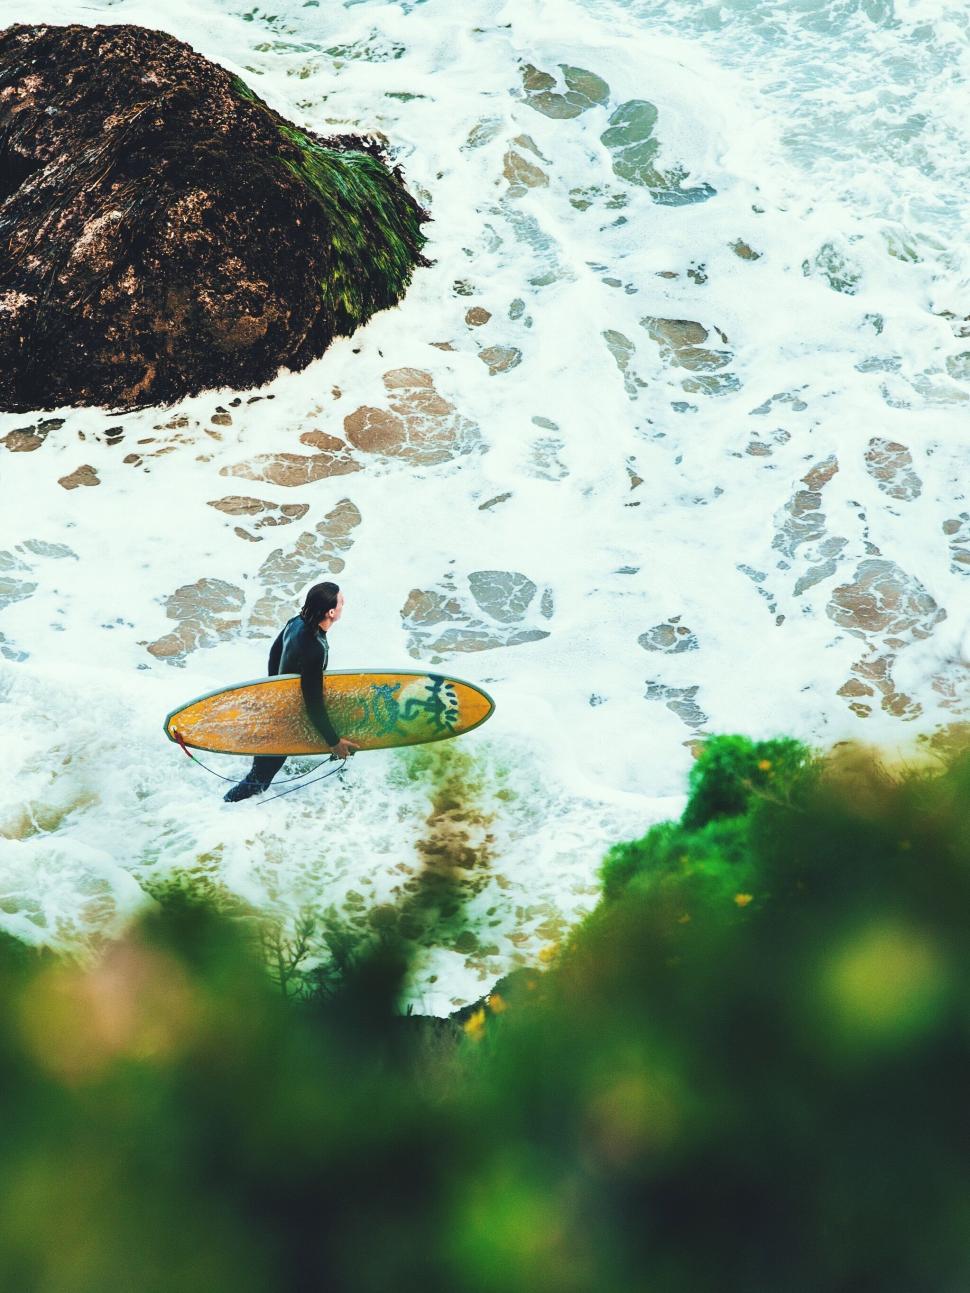 Free Image of A person holding a surfboard in the ocean 